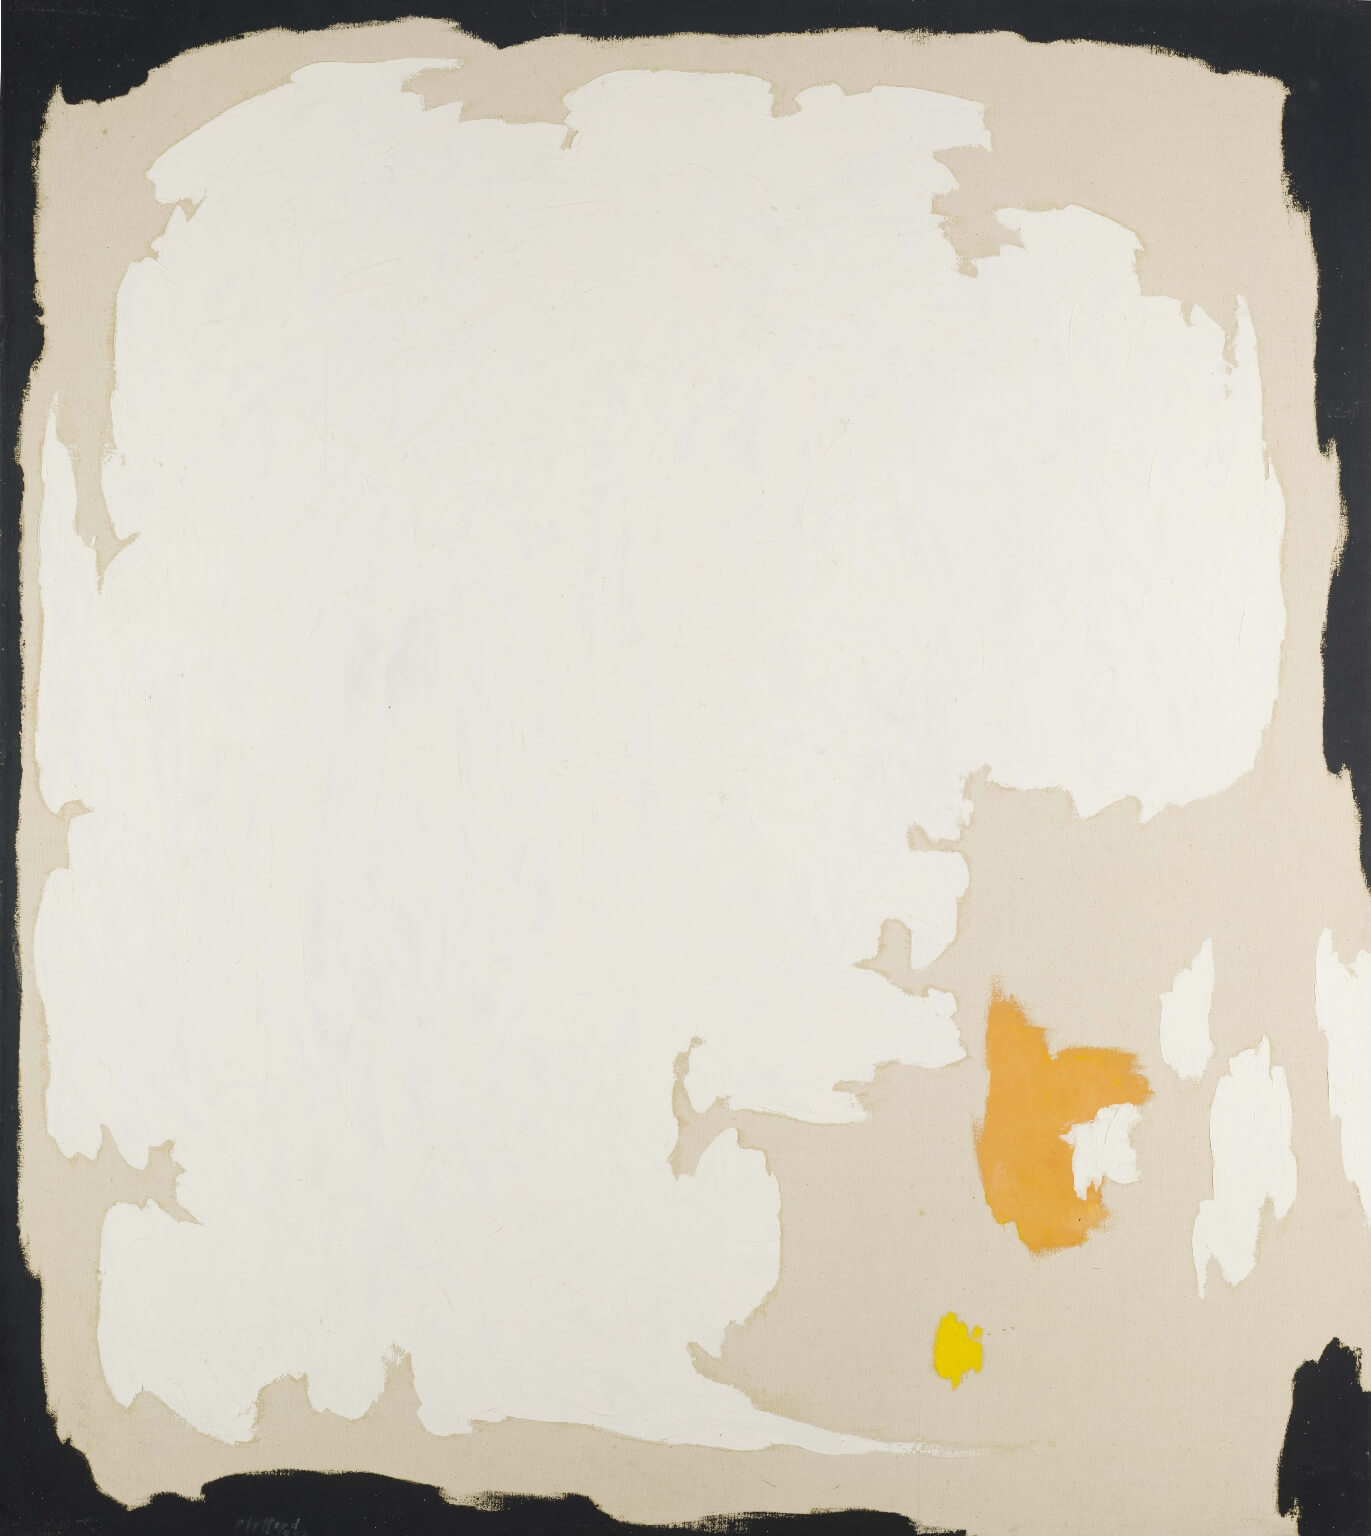 Abstract oil painting with a black frame of paint, inside that some tan, bare canvas, tan figure in the lower right corner, and gold paint